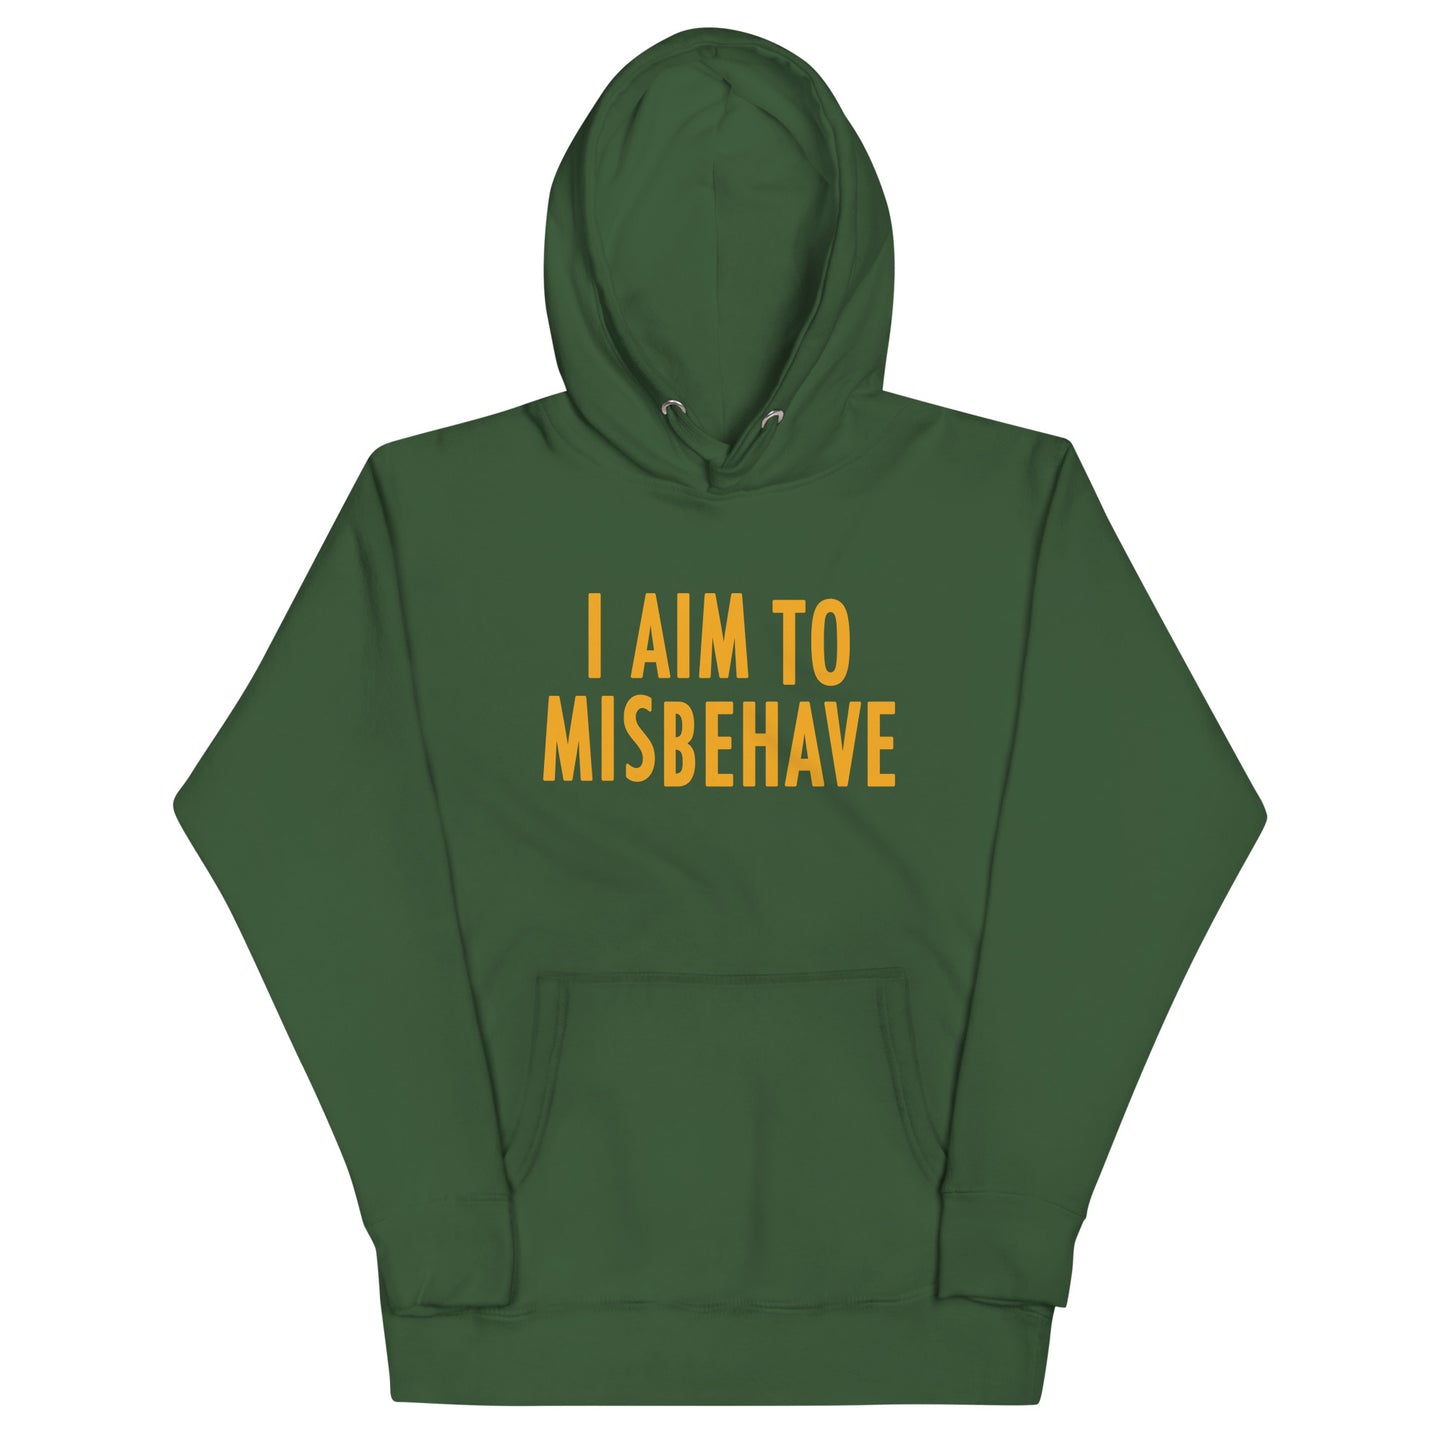 I Aim To Misbehave Unisex Hoodie